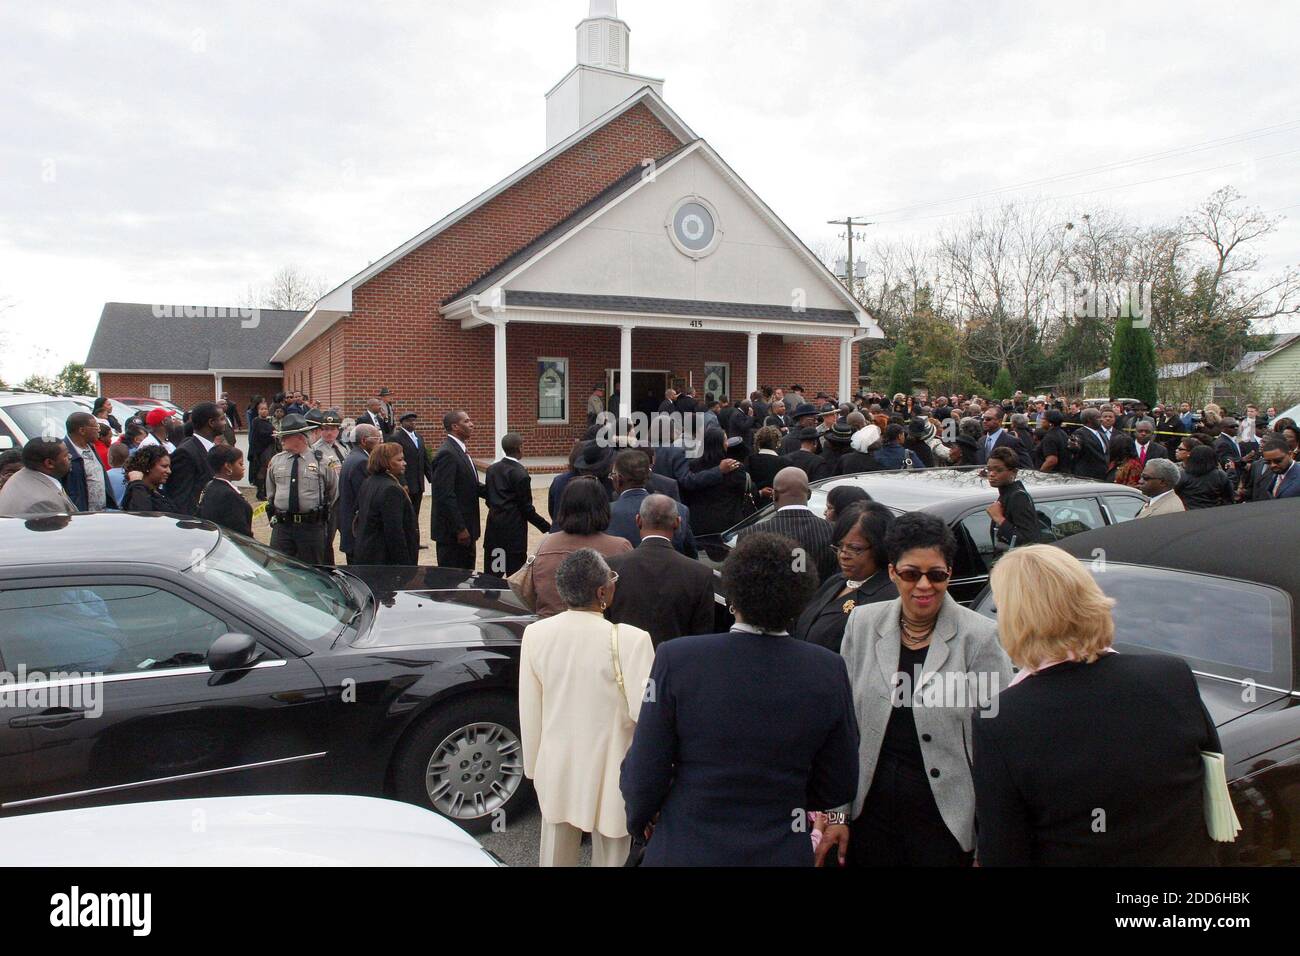 NO FILM, NO VIDEO, NO TV, NO DOCUMENTARY - Friends and family of James Brown make their way into Carpentersville Baptist church for his private funeral service in Augusta, Georgia, Friday, December 29, 2006. Photo by C. Aluka Berry/The State/MCT/ABACAPRESS.COM Stock Photo